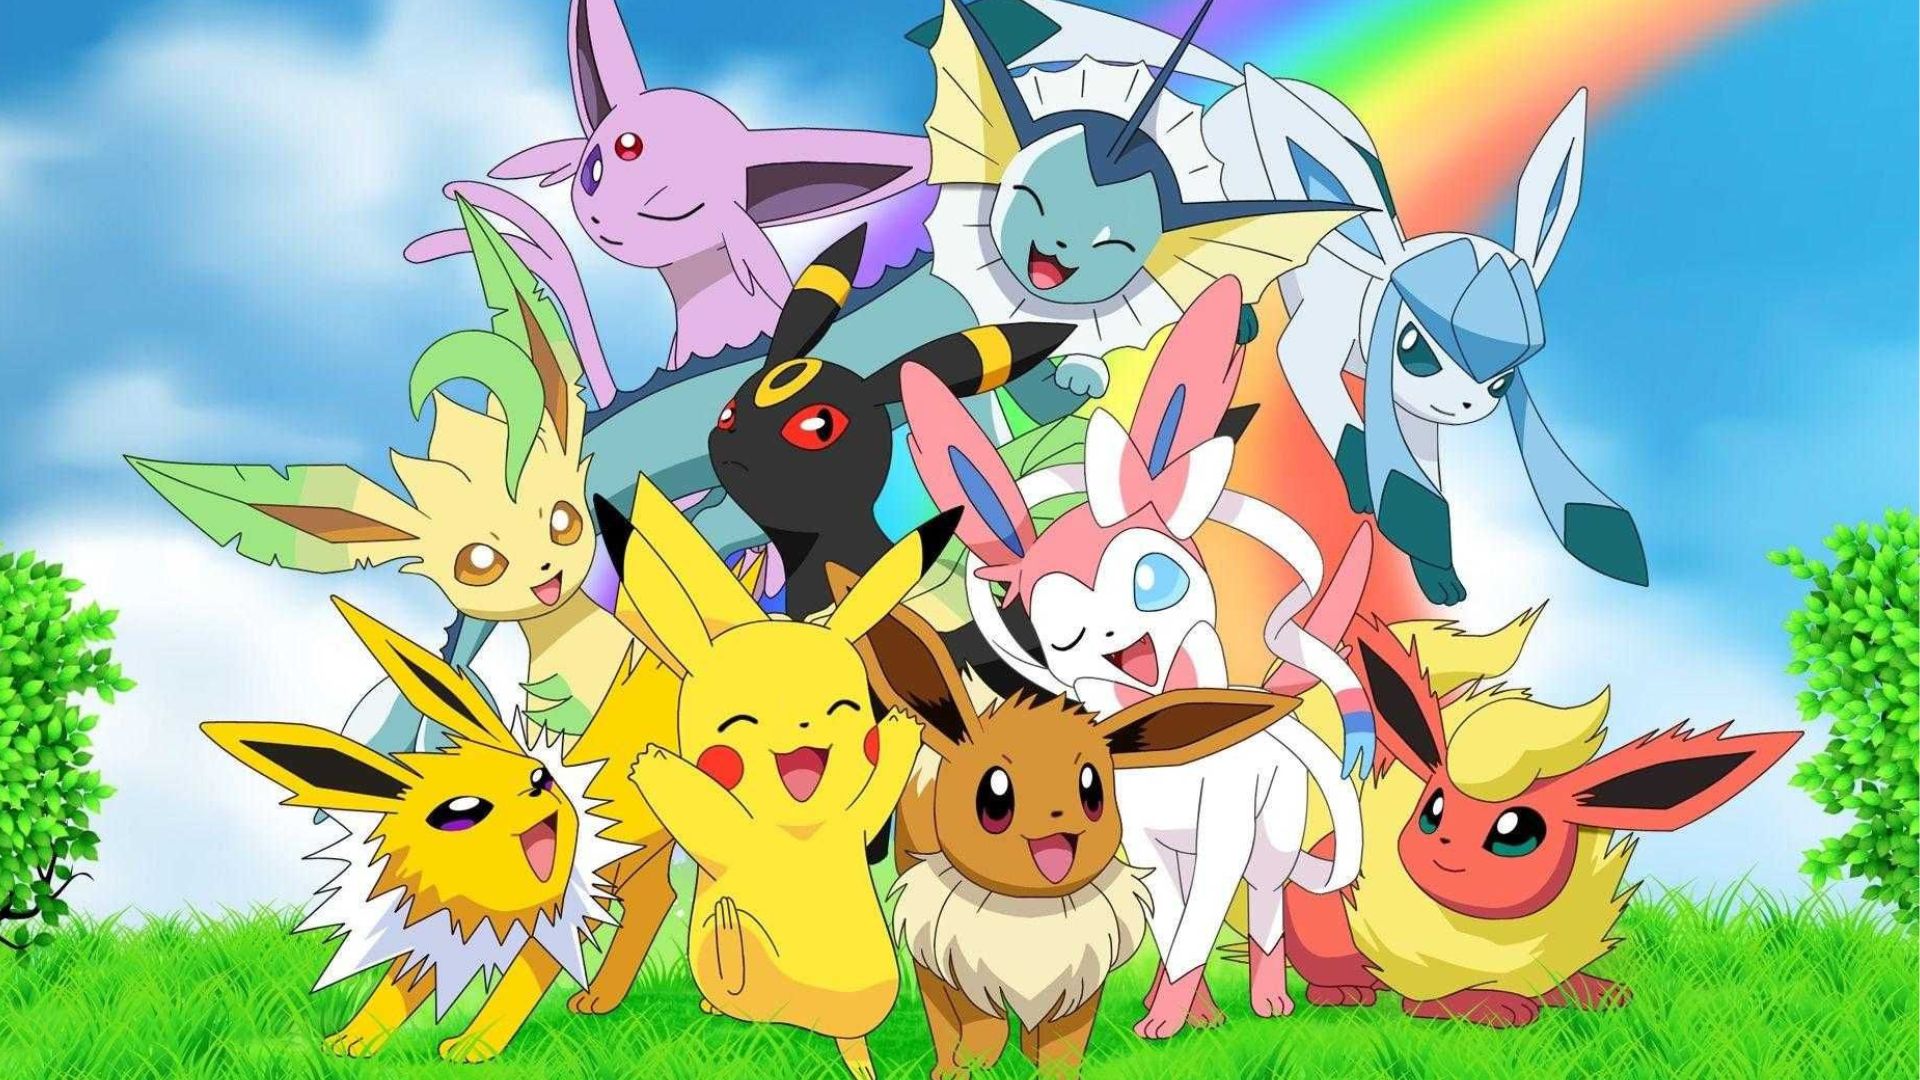 My collection of Pokemon wallpapers gathered over the past year  1920x1080  rpokemon